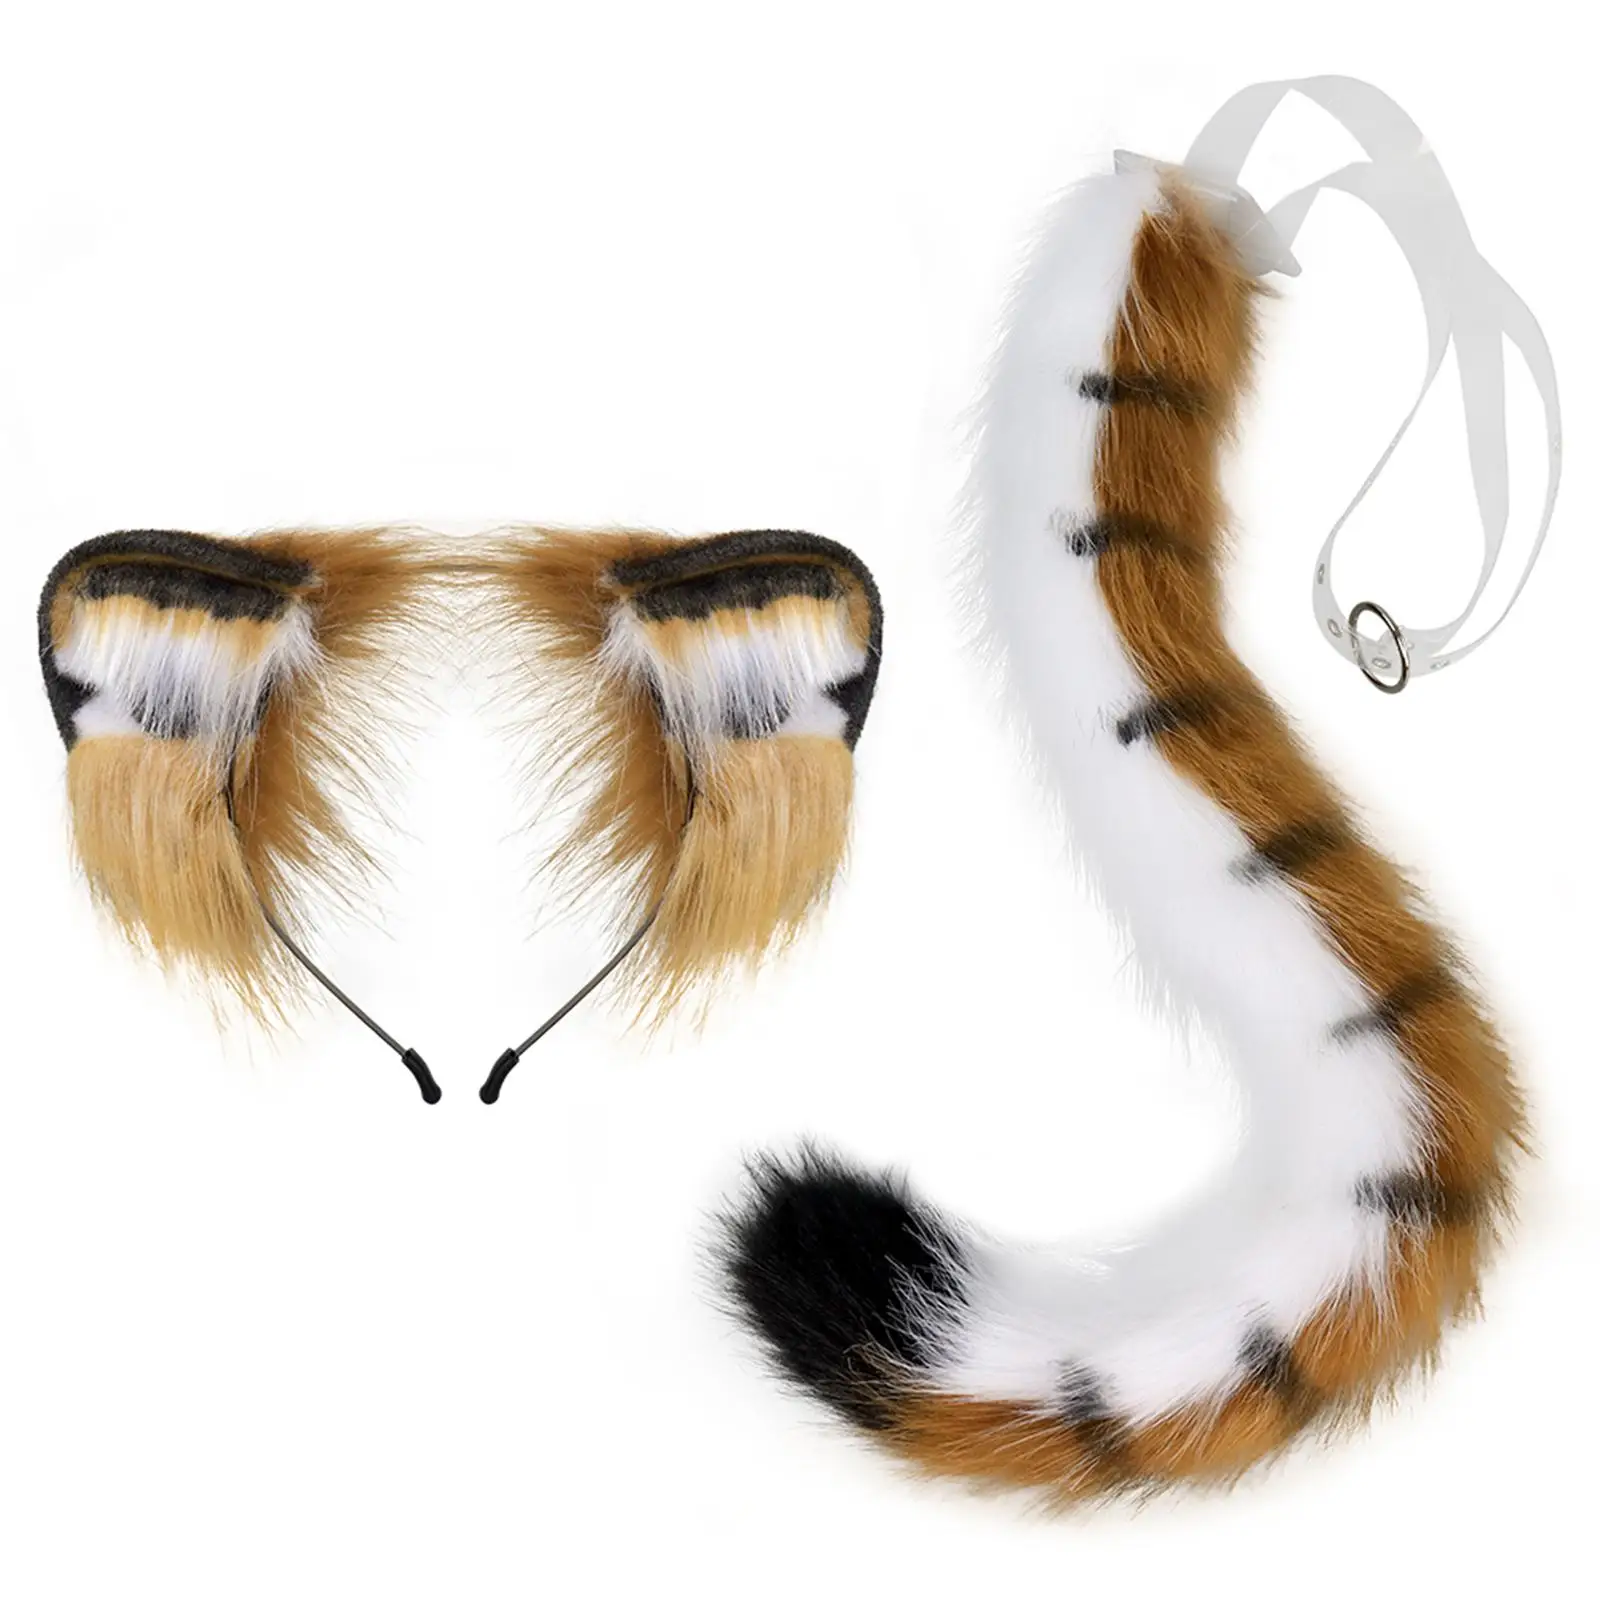 Tiger Ears and Tail Set Cosplay Headpiece Headwear Tiger Ears Hair Hoop for Carnival Prom Birthday Stage Performance Role Play